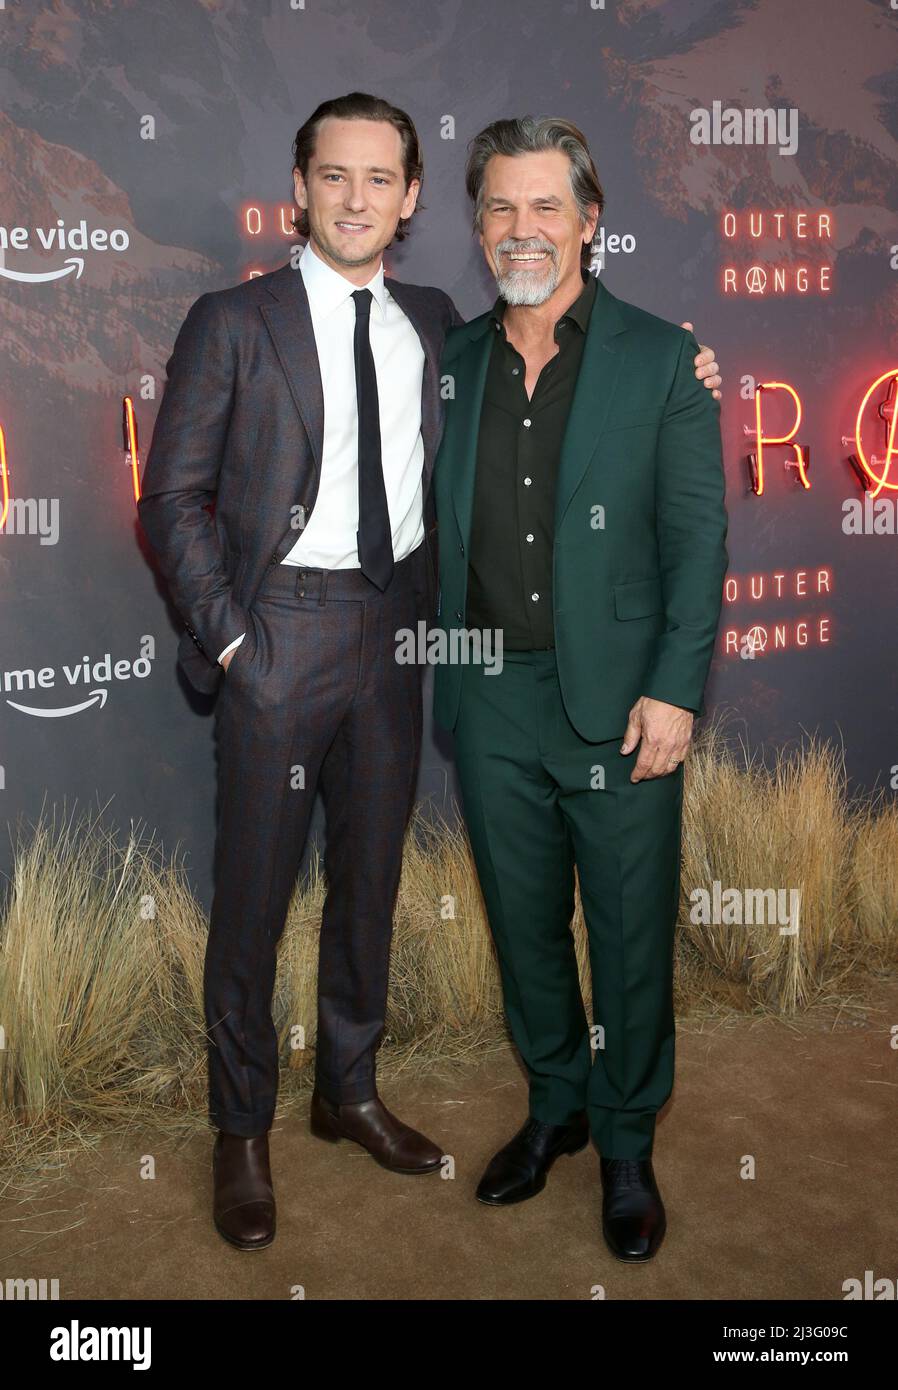 LOS ANGELES, CA - APRIL 7 - Lewis Pullman, Josh Brolin, at Prime Video's Outer Range premiere at The Harmony Gold Theater in Los Angeles, California on April 7, 2022. Credit: Faye Sadou/MediaPunch Stock Photo